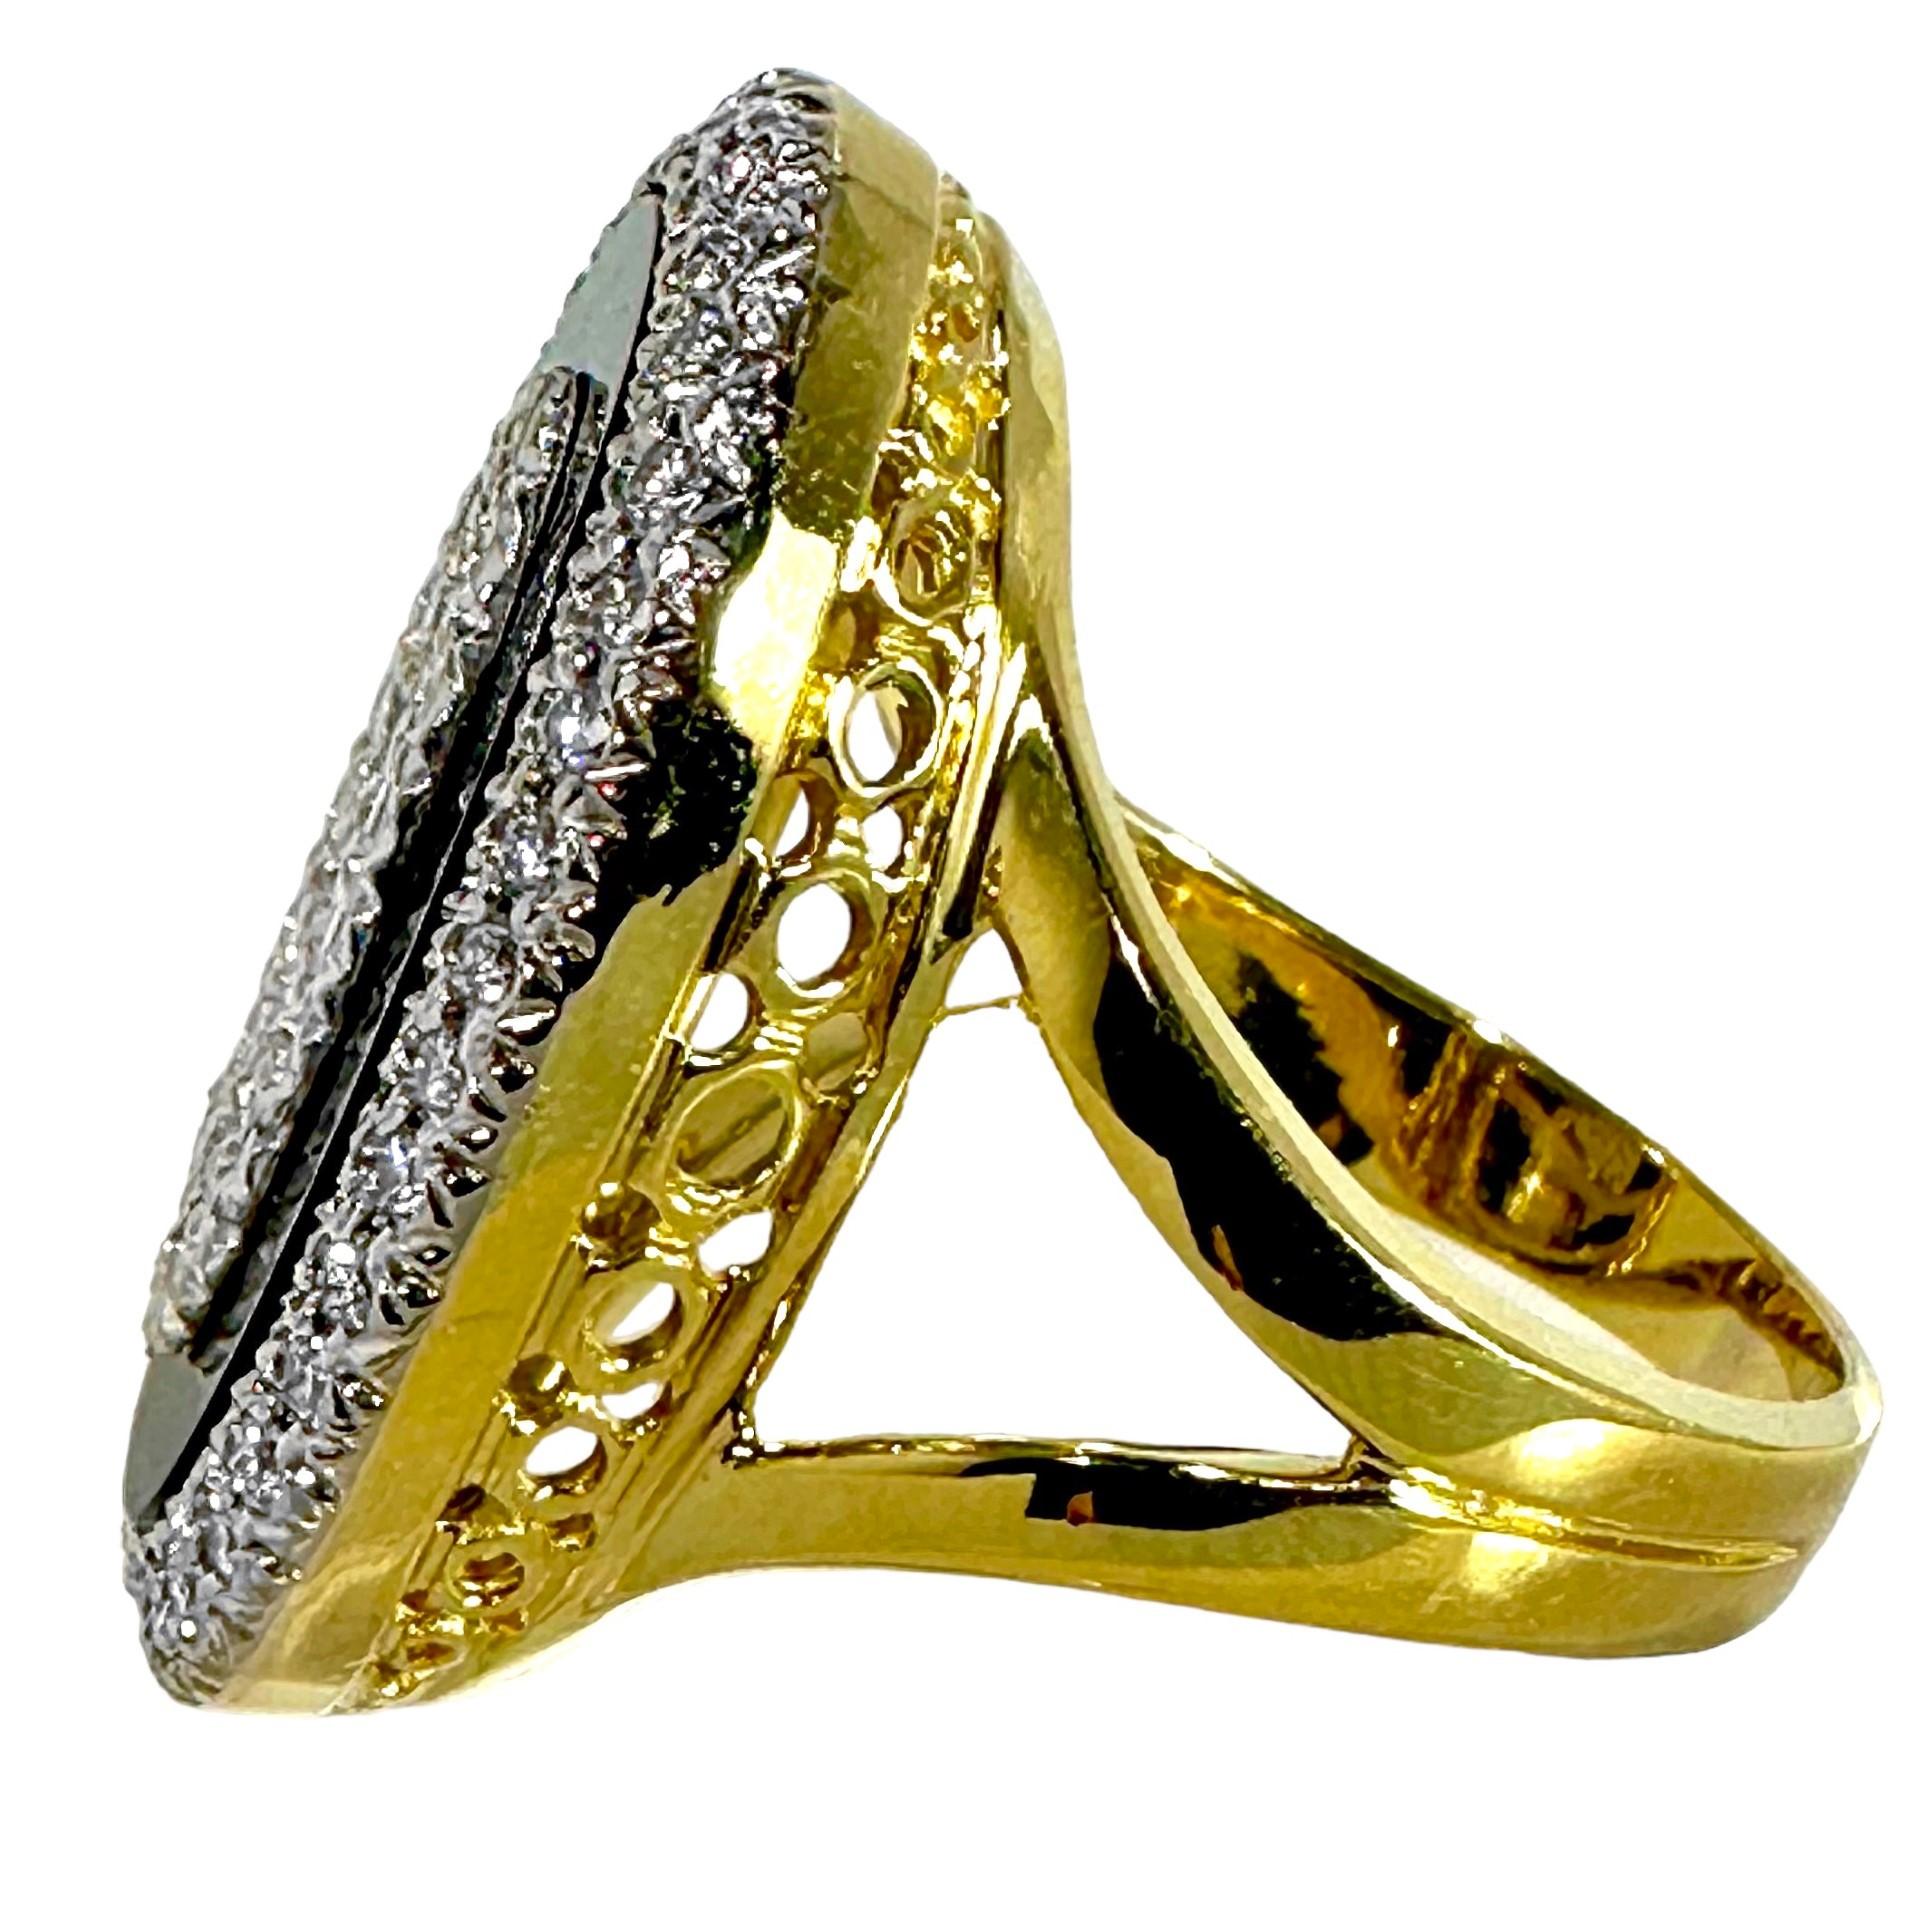 Onyx, Diamond and 18K Gold, Oval Shaped Ring 1 Inch Long x 5/8 Inch Wide In Good Condition For Sale In Palm Beach, FL